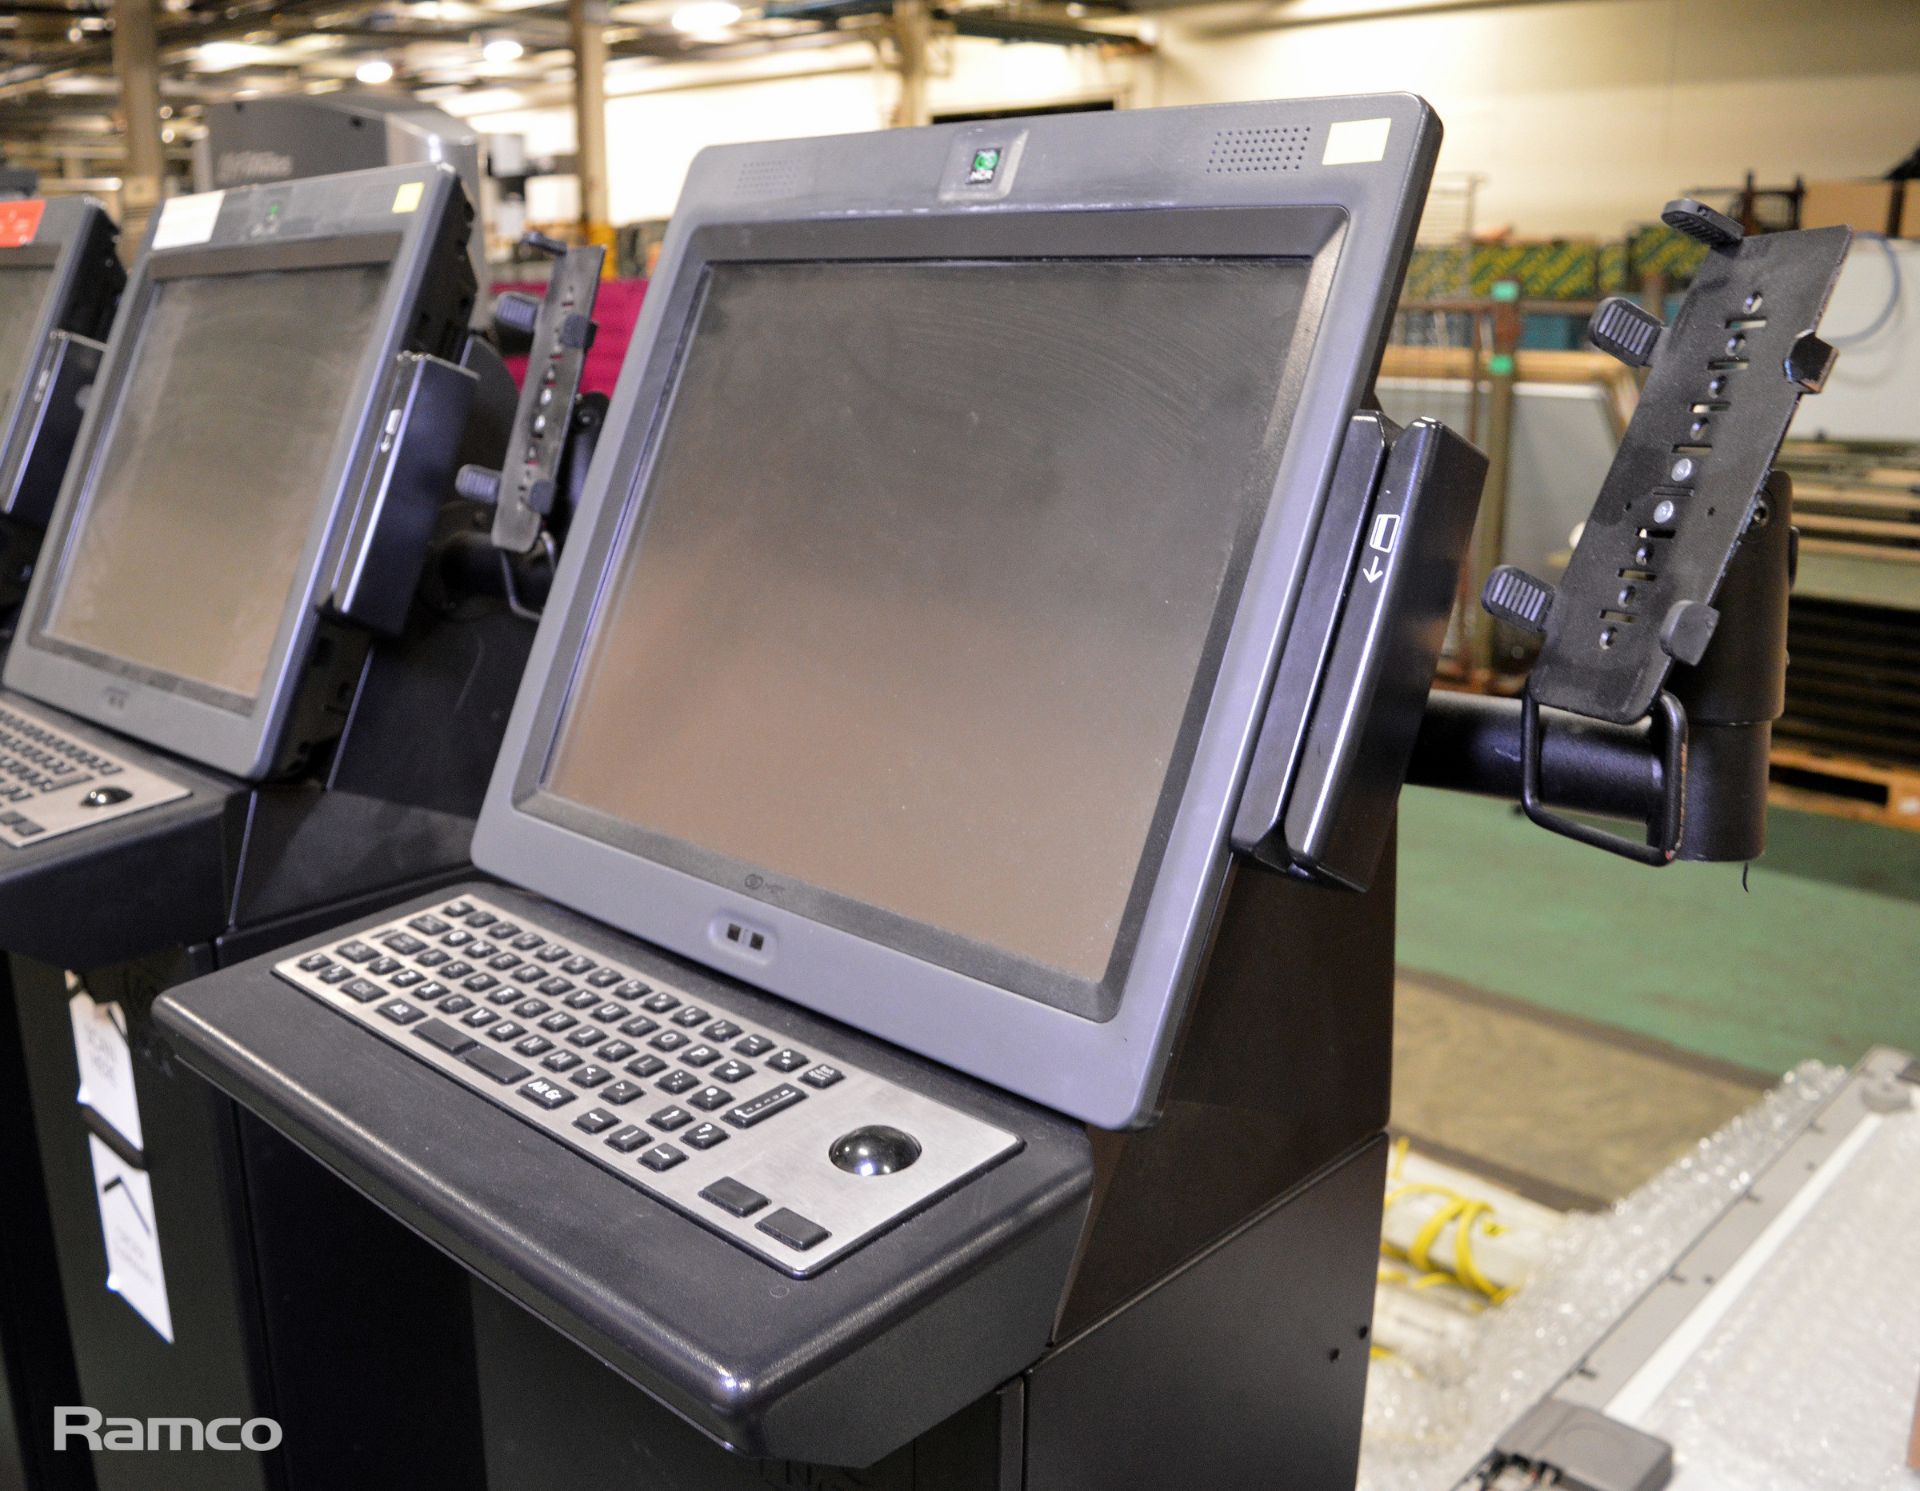 2x NCR Digital Shop Touchscreen Consoles - L 600mm x W 540mm x H 1400mm - Image 2 of 4